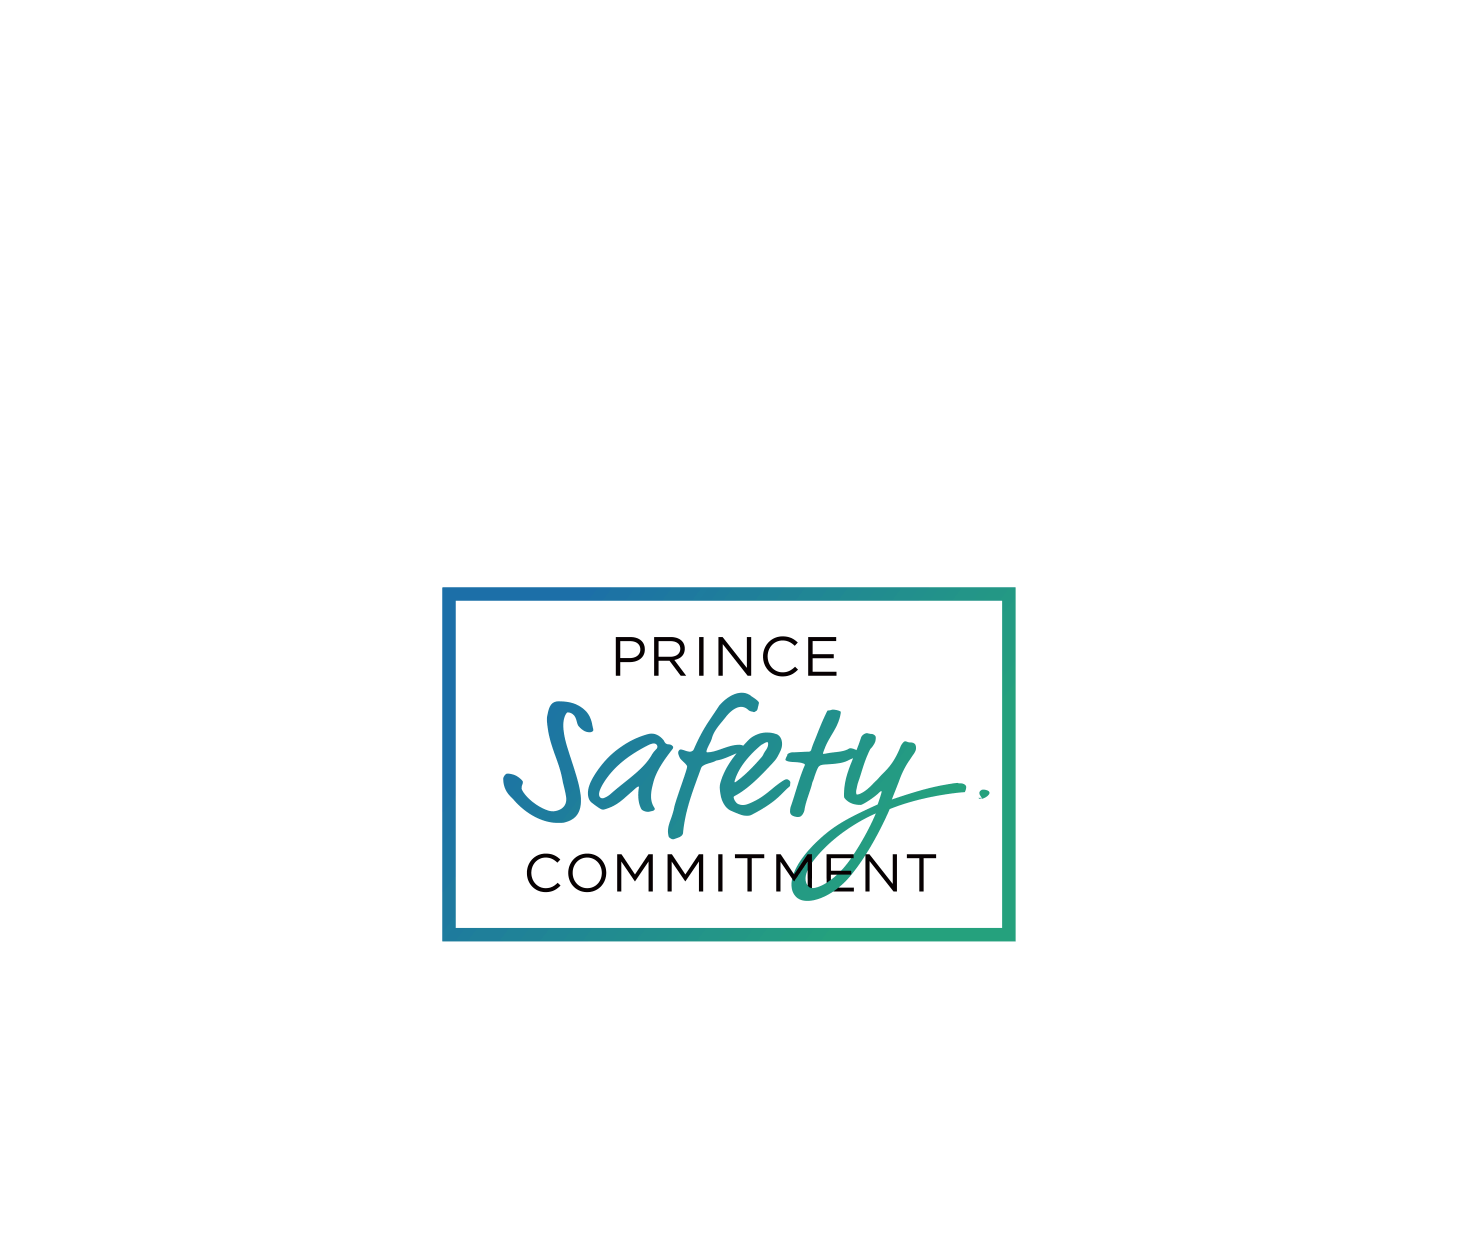 Safety Commitment